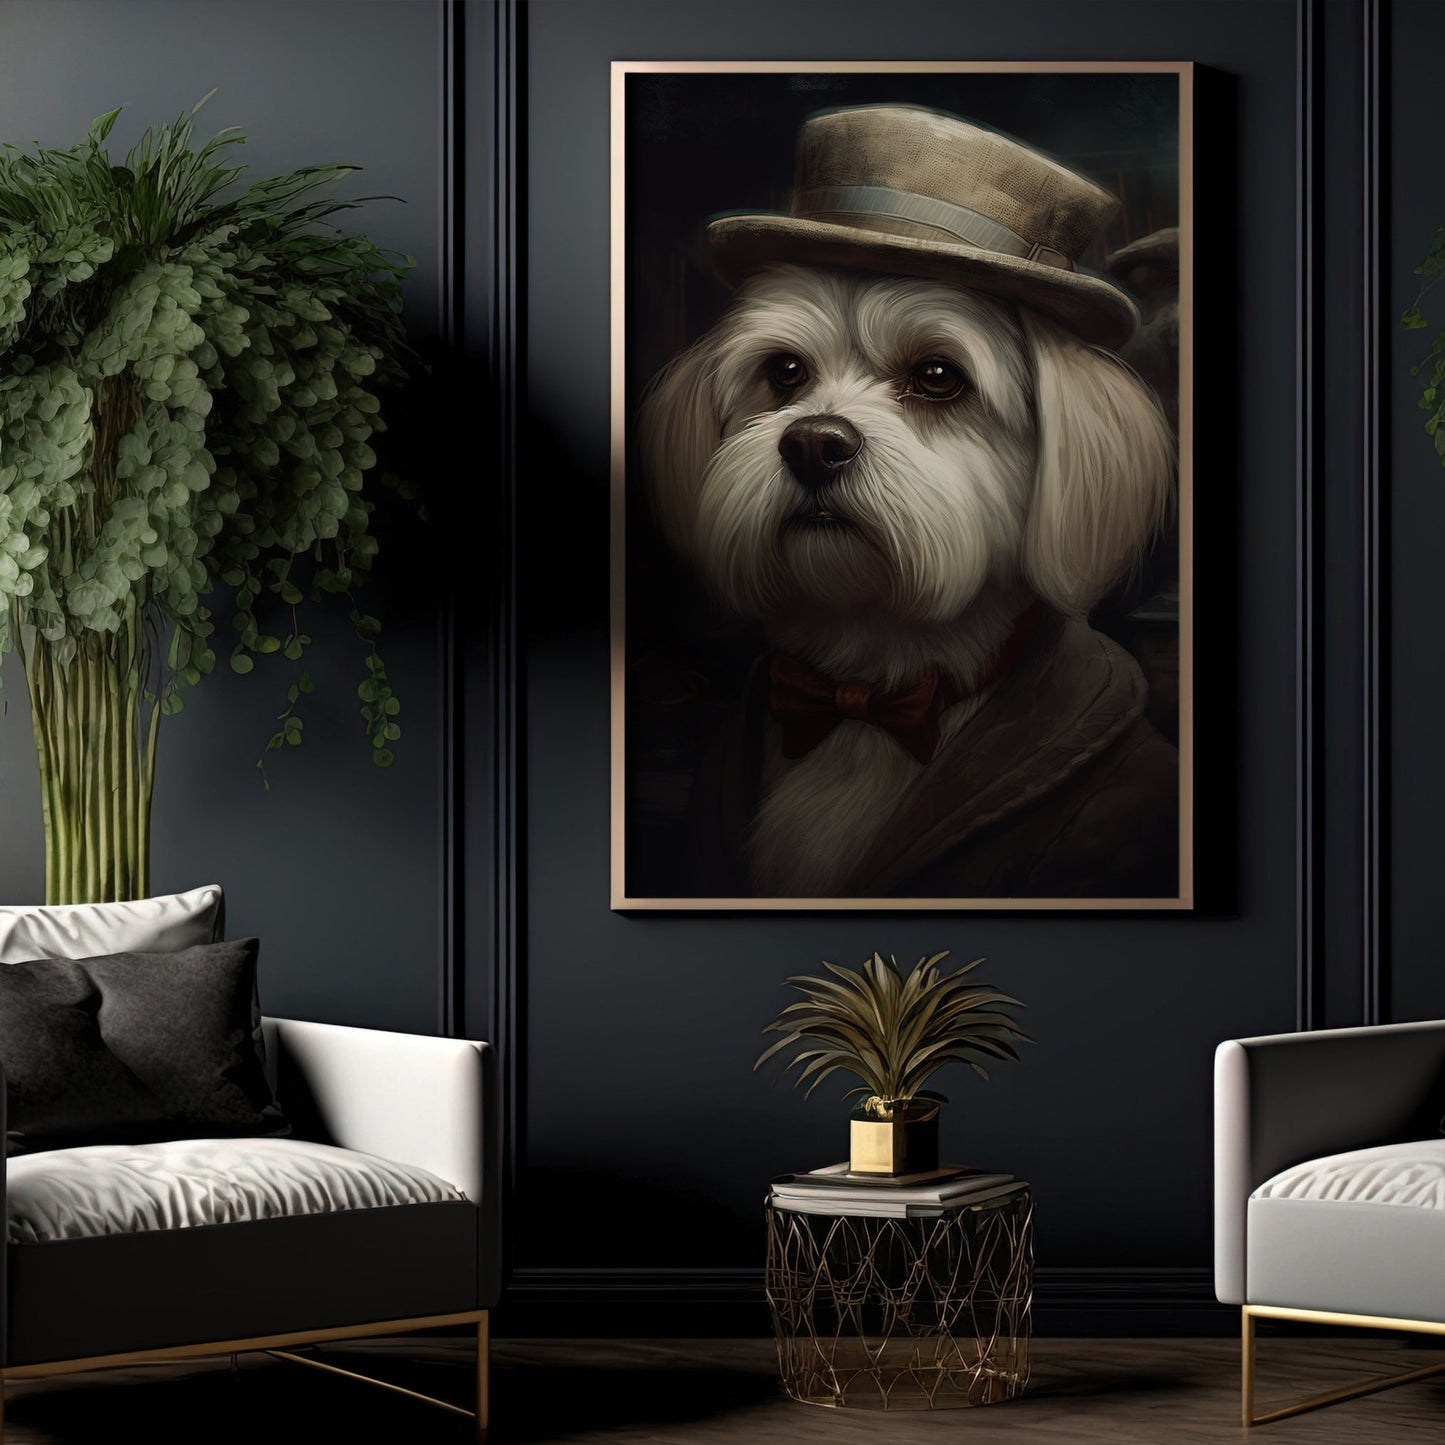 Gentlemen Maltese In Suit Style, Victorian Dog Canvas Painting, Victorian Animal Wall Art Decor, Poster Gift For Maltese Dog Lovers